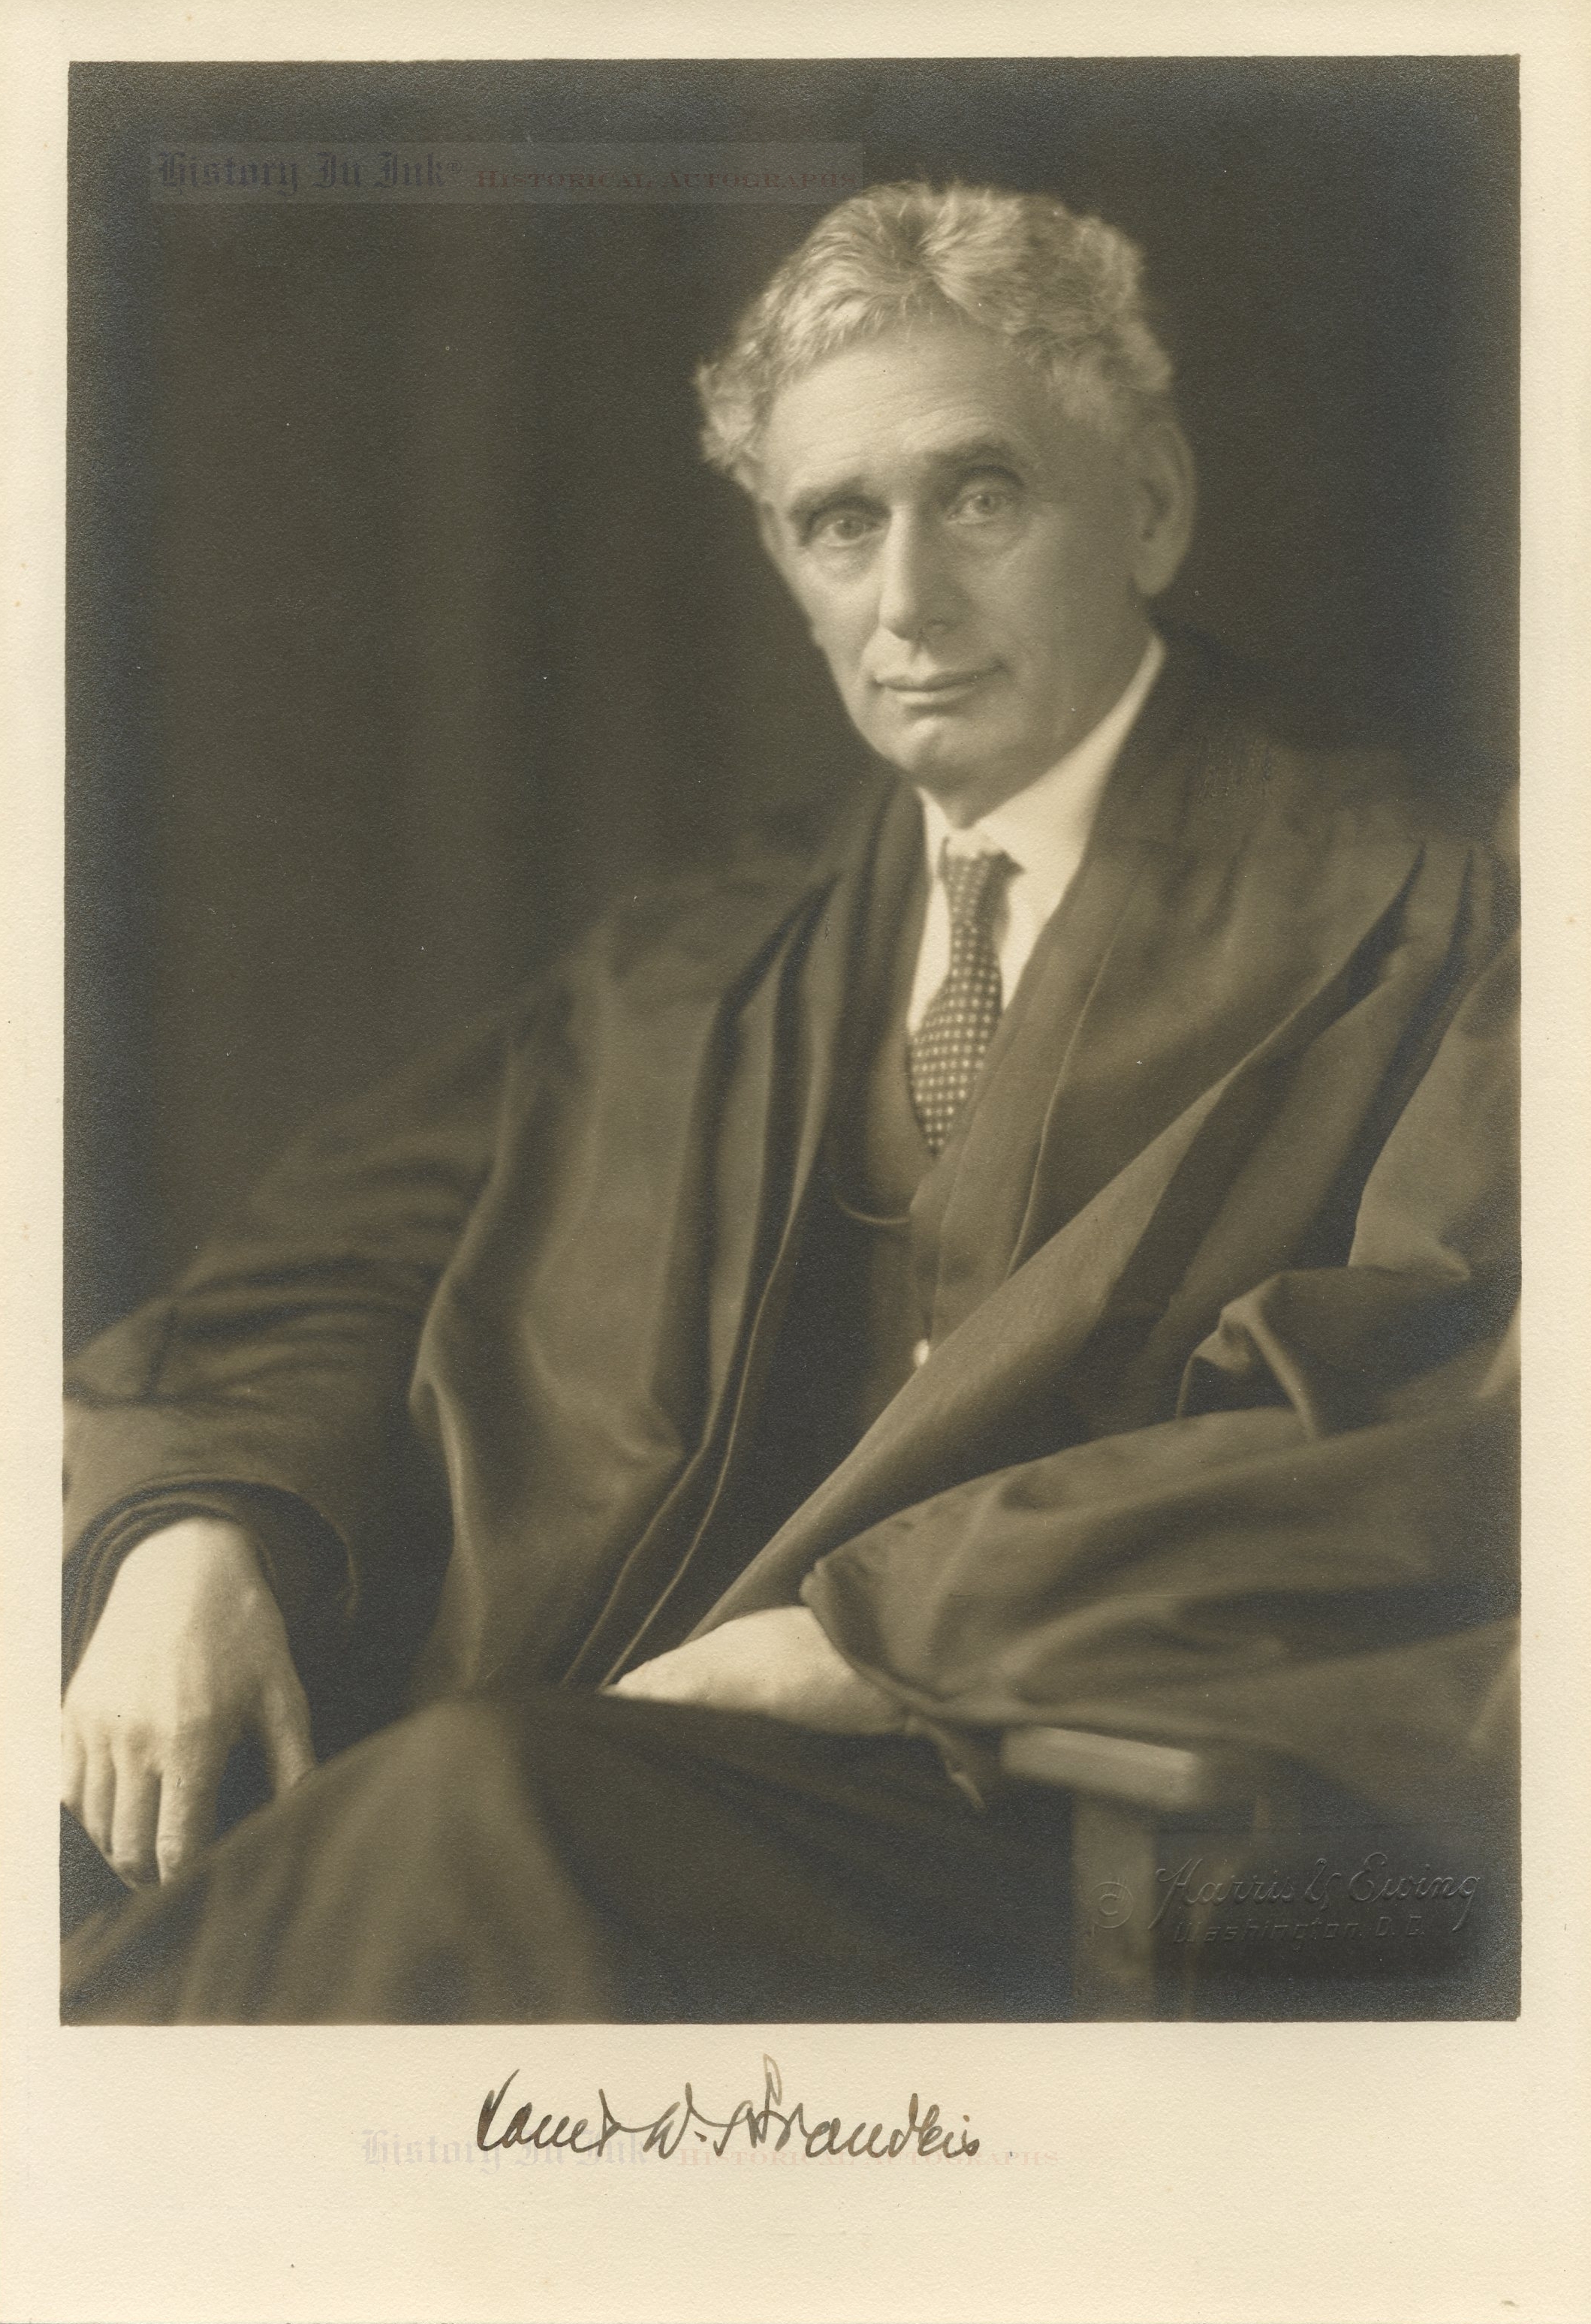 Louis Dembitz Brandeis Collection, Special Collections Spotlight, Collection Essays, Robert D. Farber University Archives and Special  Collections